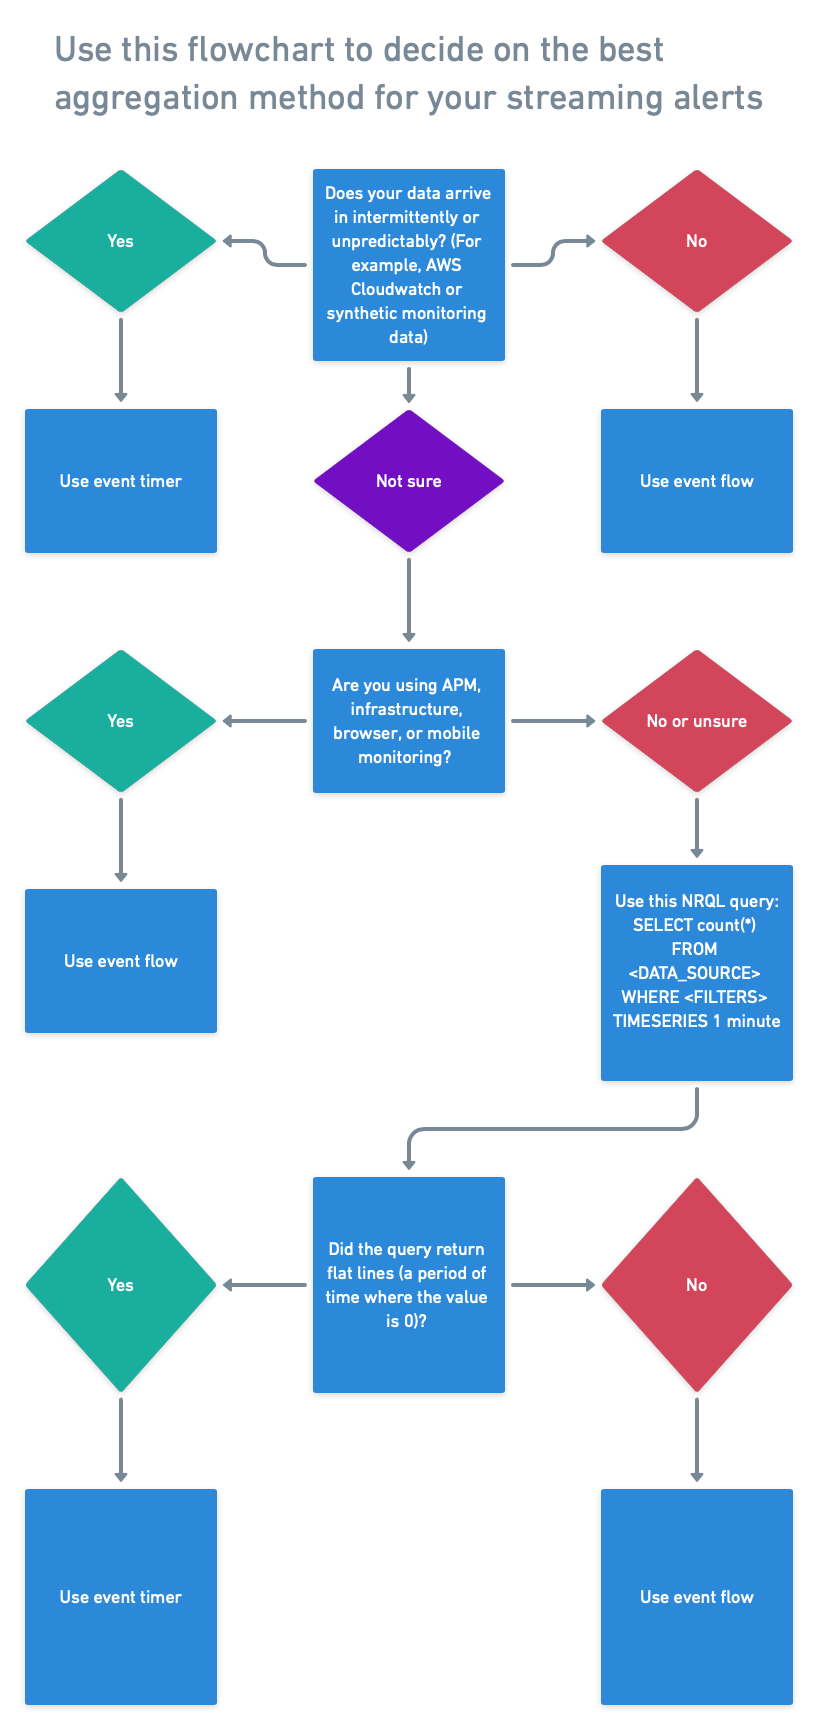 A flowchart image that helps you decide what aggregation method you should use.